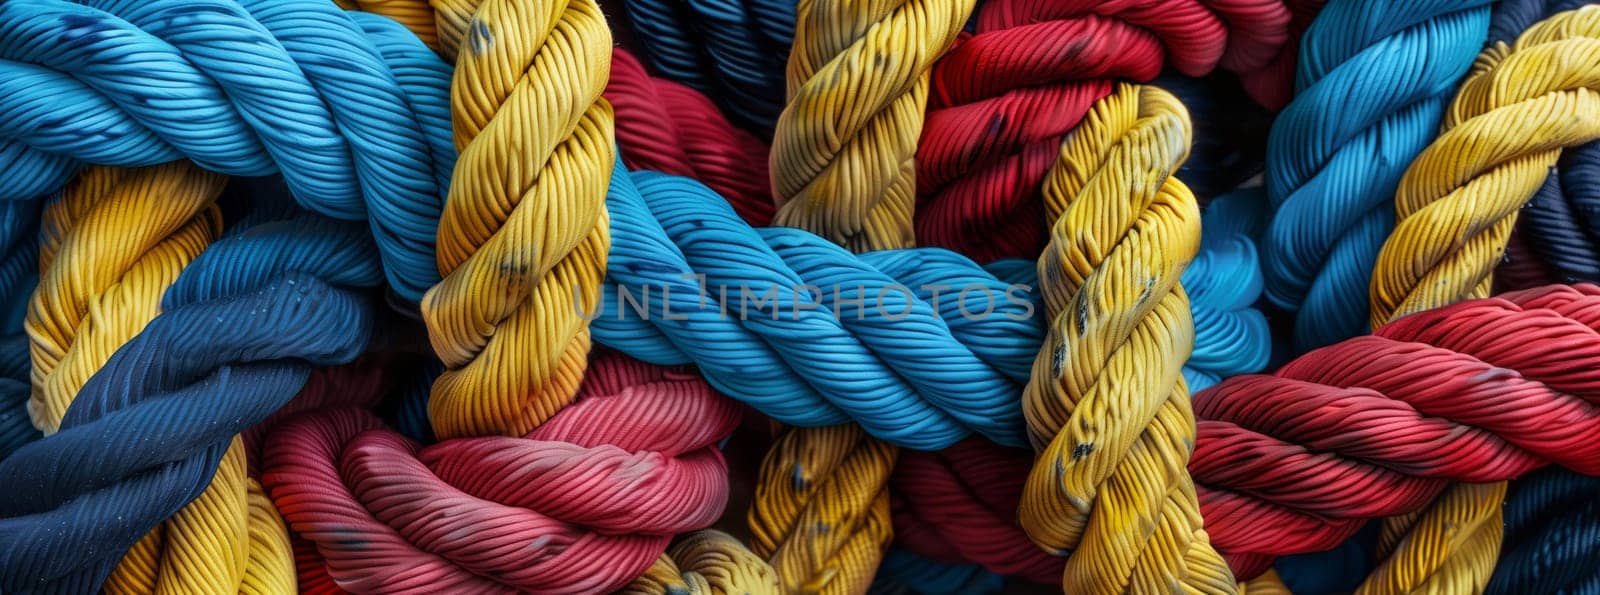 A close up of a vibrant pattern of yellow, magenta, and electric blue woolen ropes tied together, showcasing an artful fashion accessory design